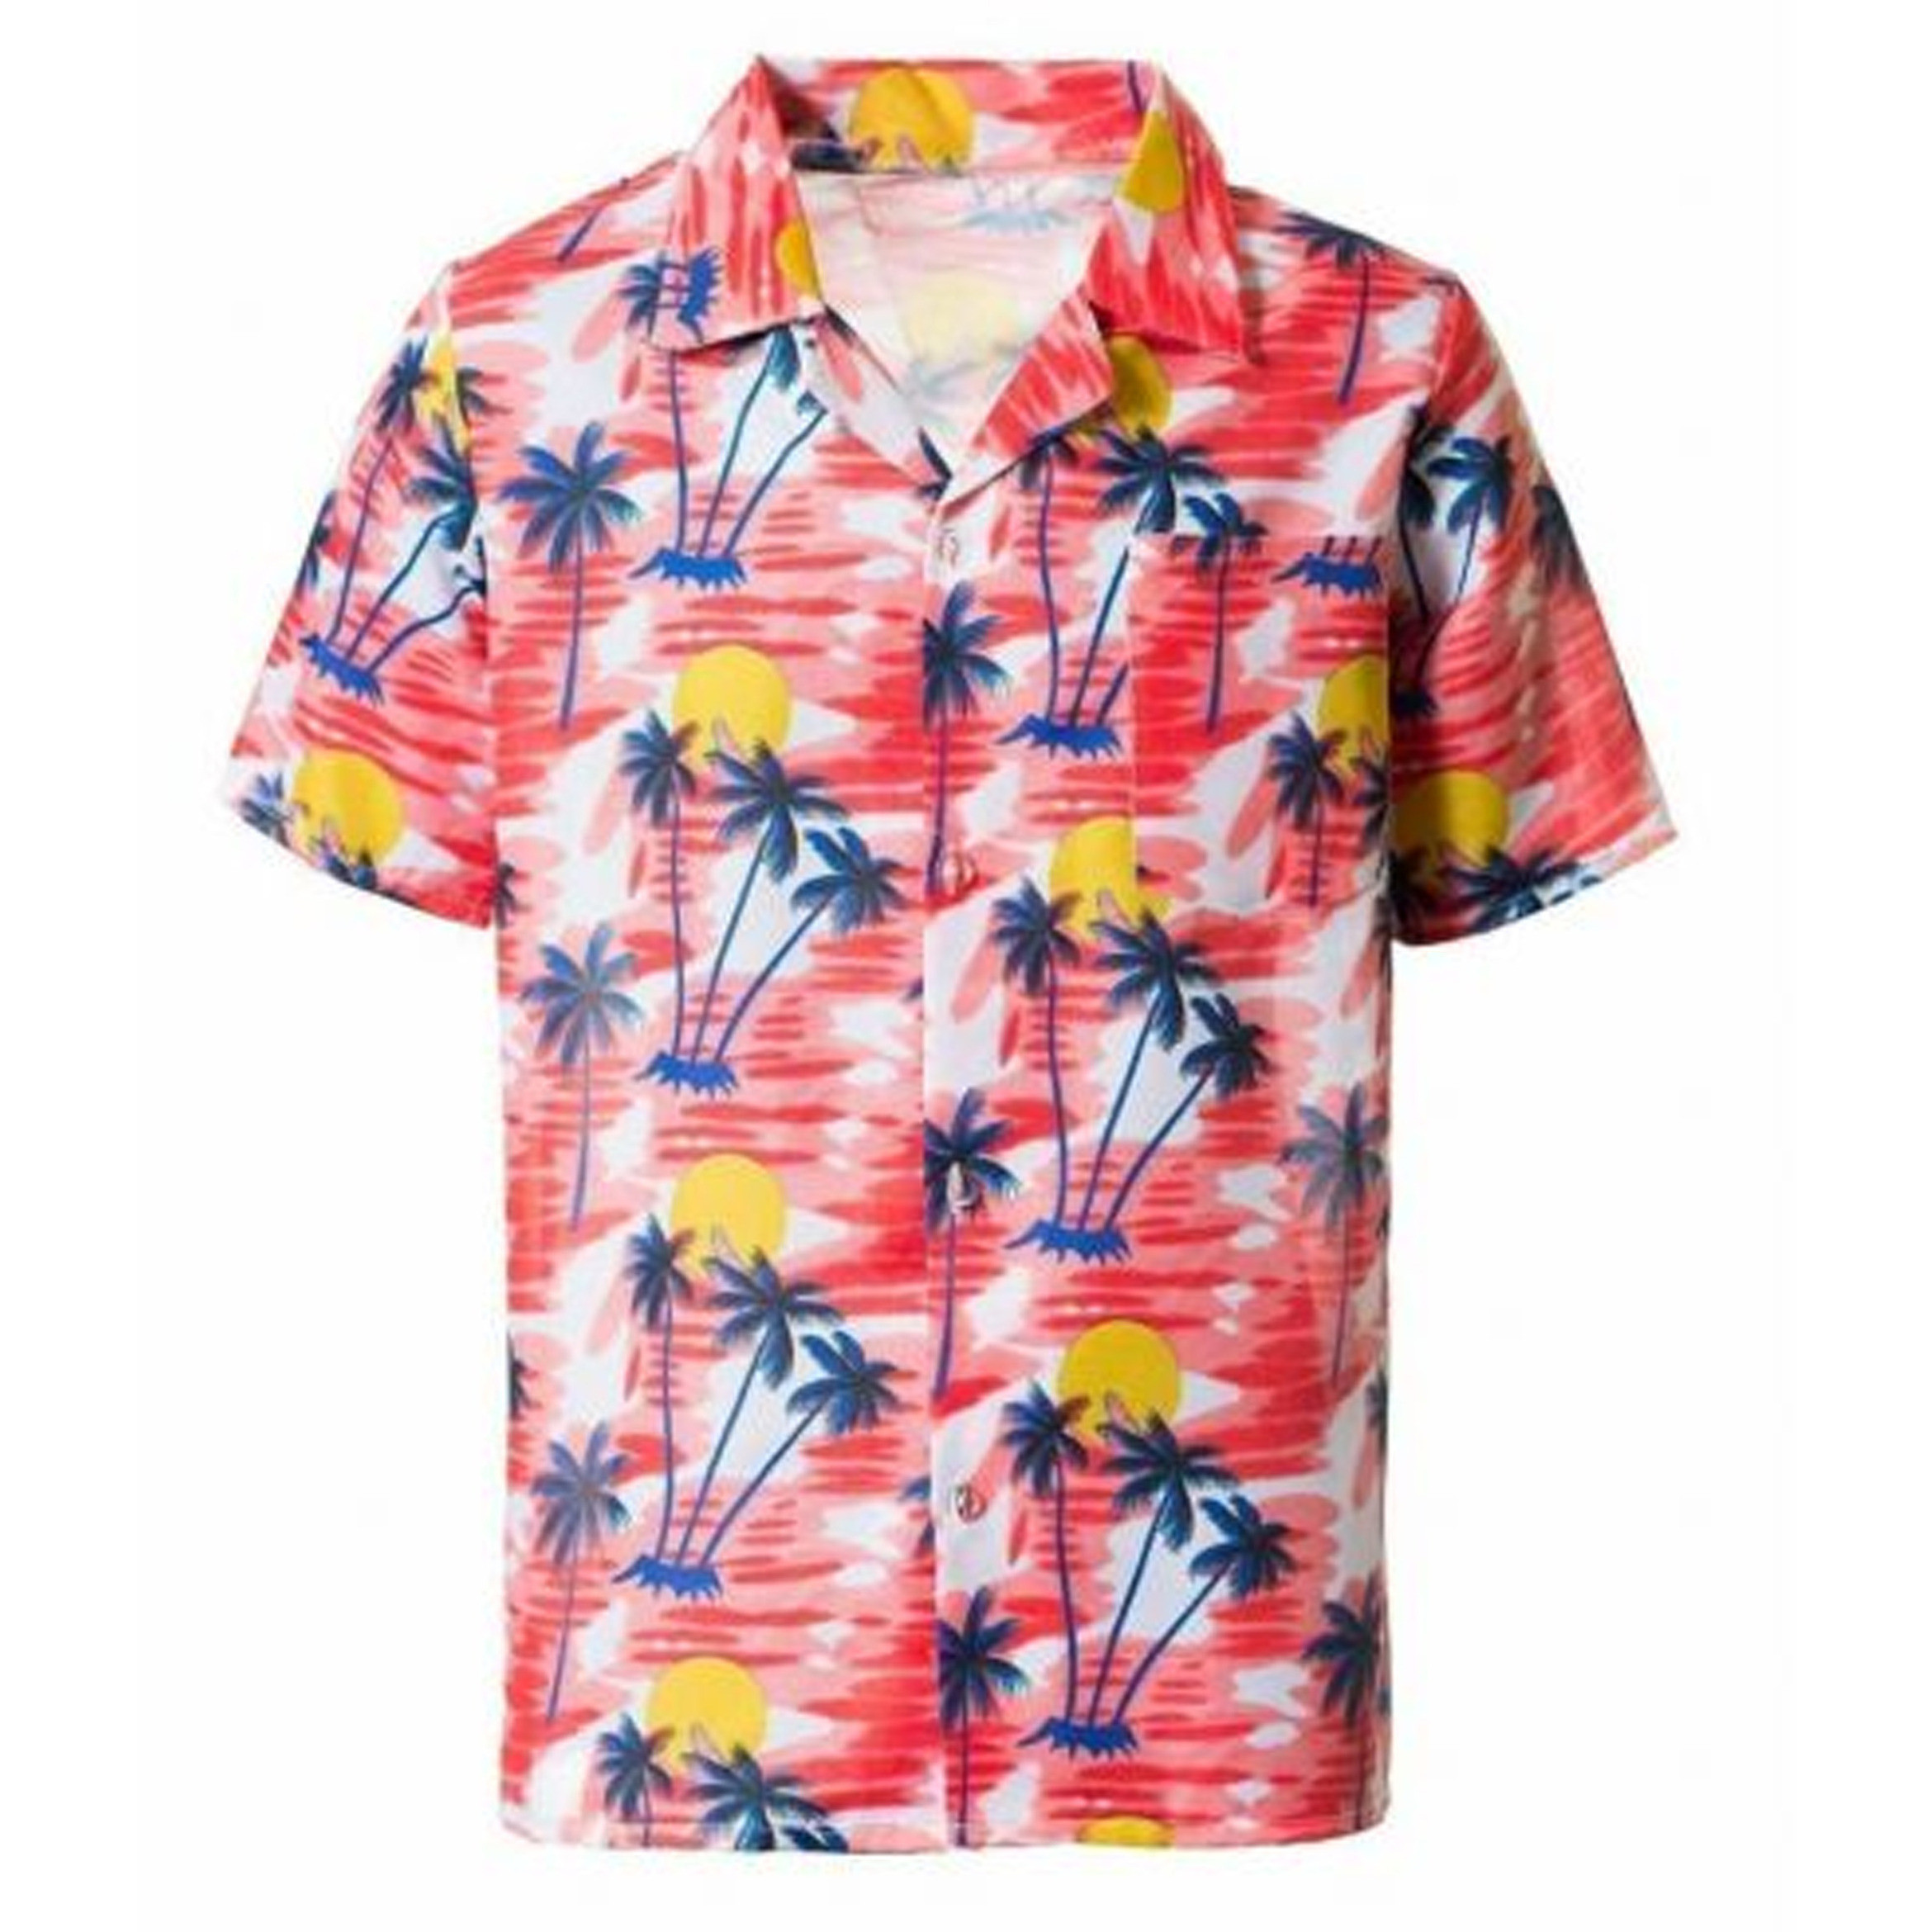 Toppers - Tropical party Hawaii blouse heren - palmbomen - rood - carnaval/themafeest